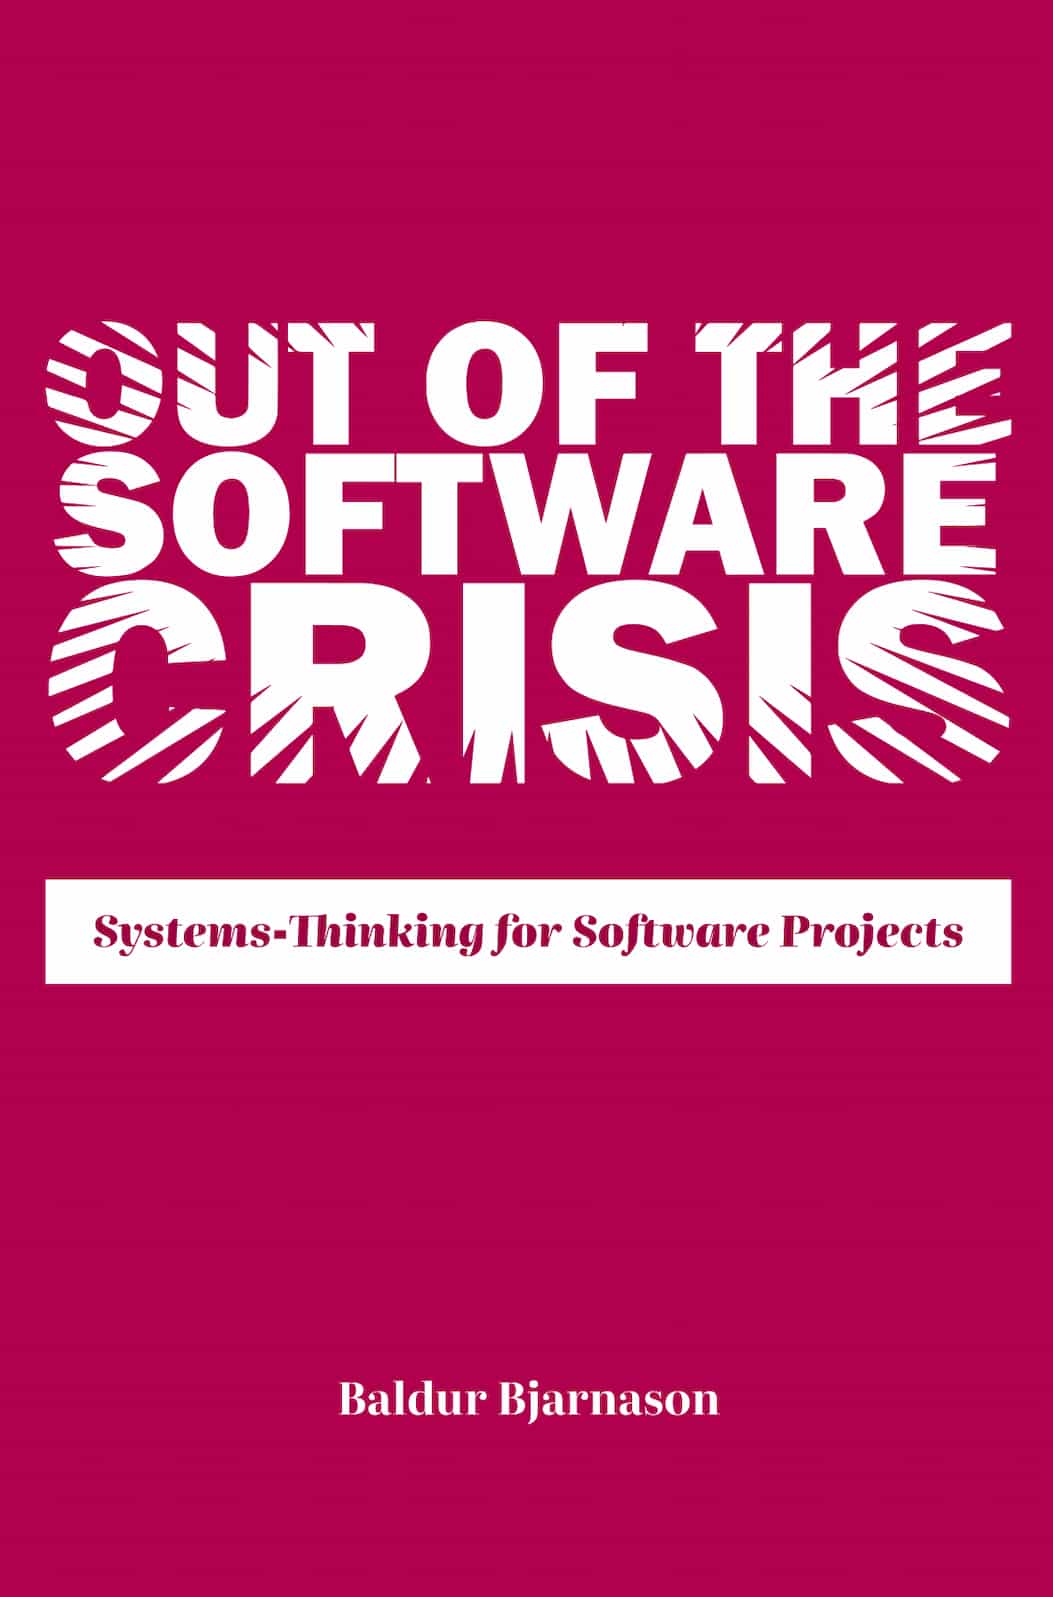 The cover for the book. It says 'Out of the Software Crisis: Systems-Thinking for Software Projects, by Baldur Bjarnason'